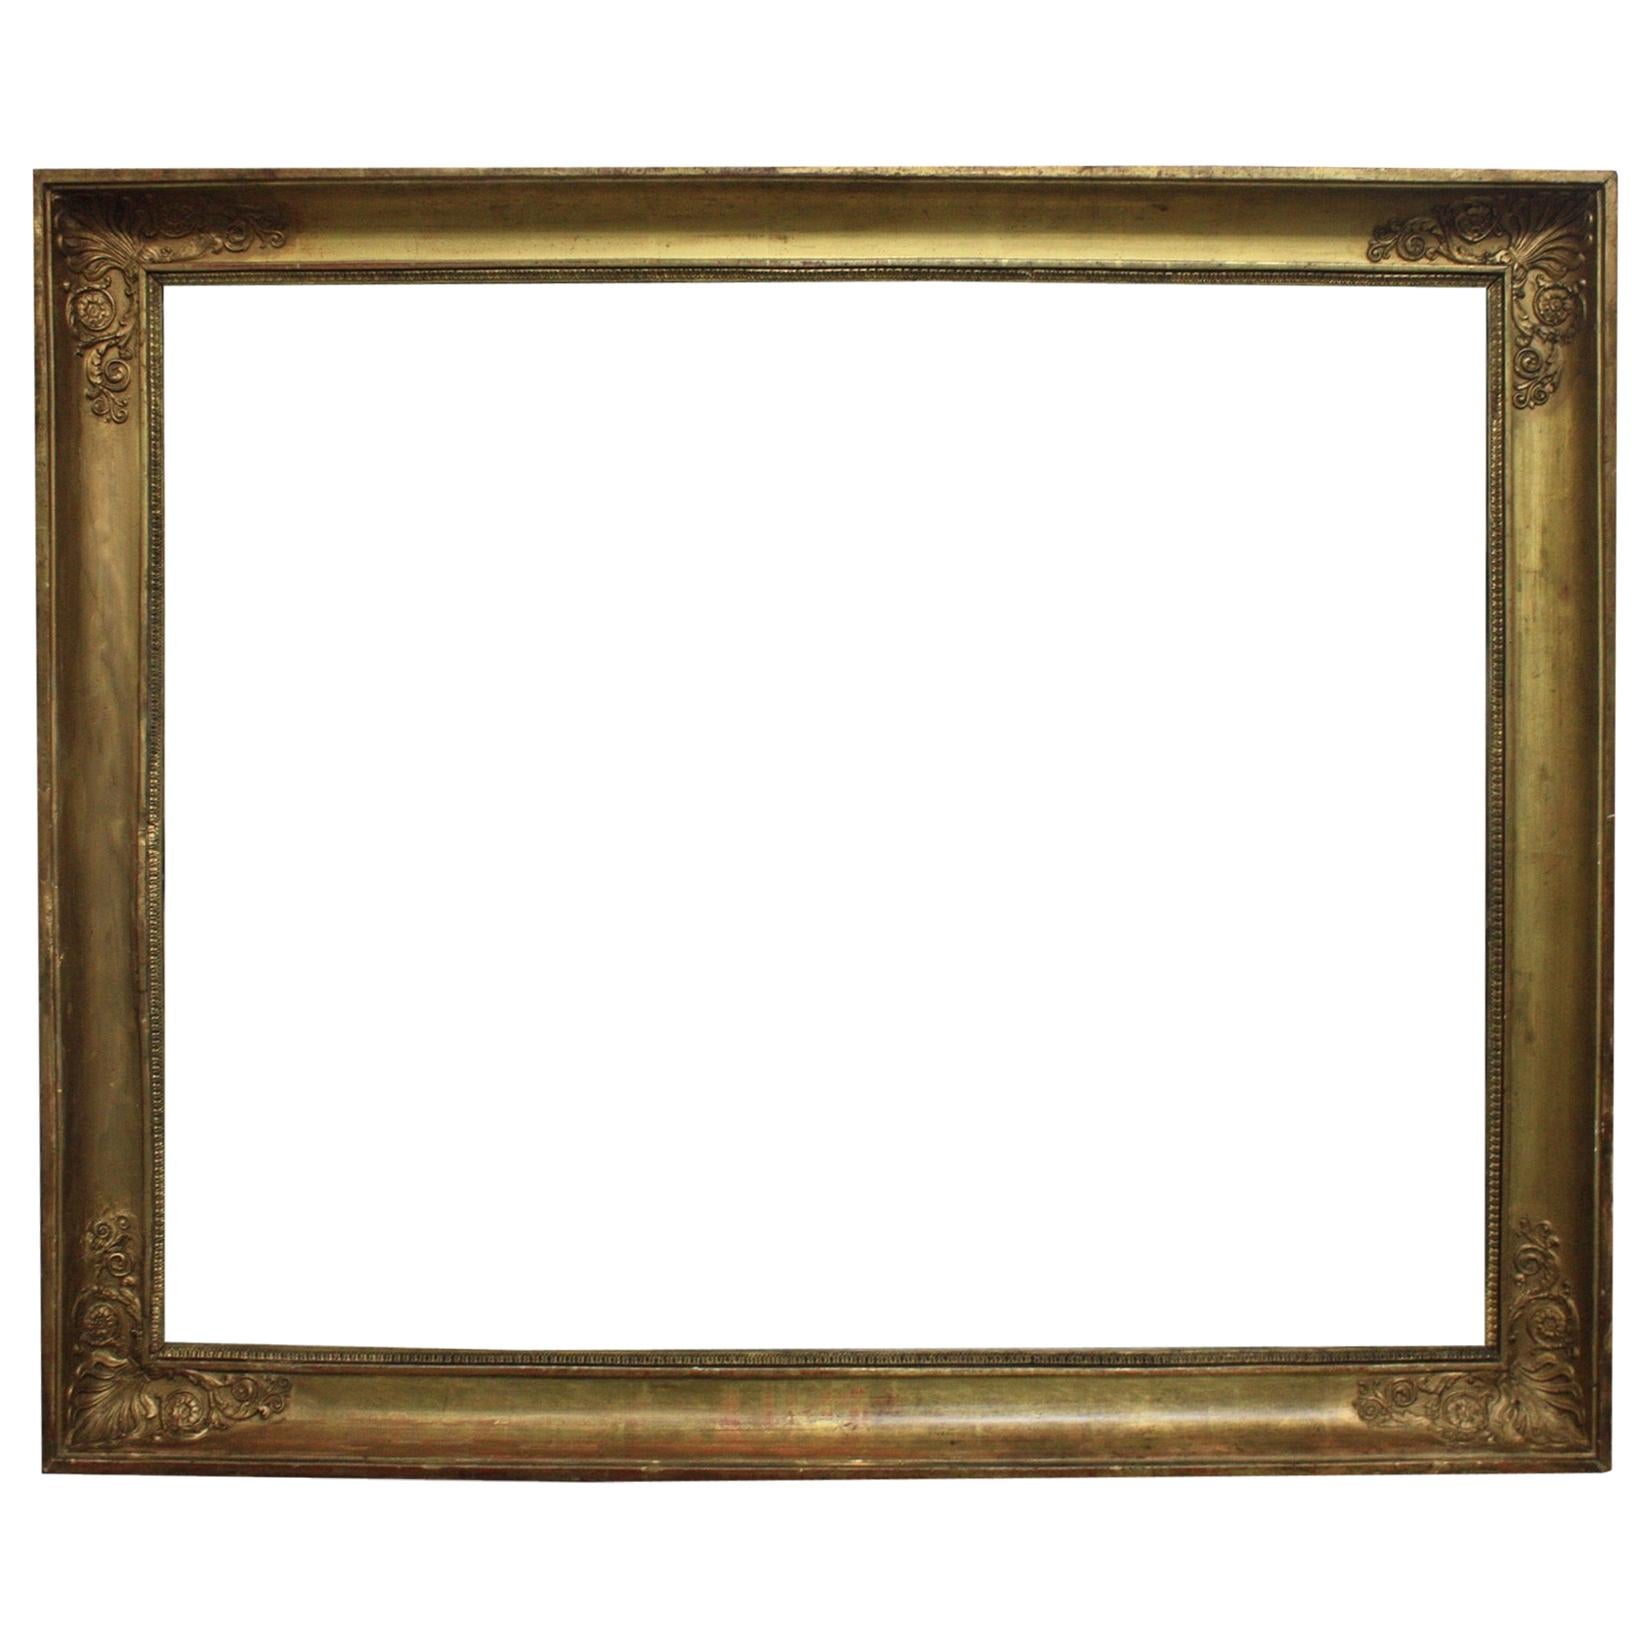 Early 19th Century French Giltwood Frame